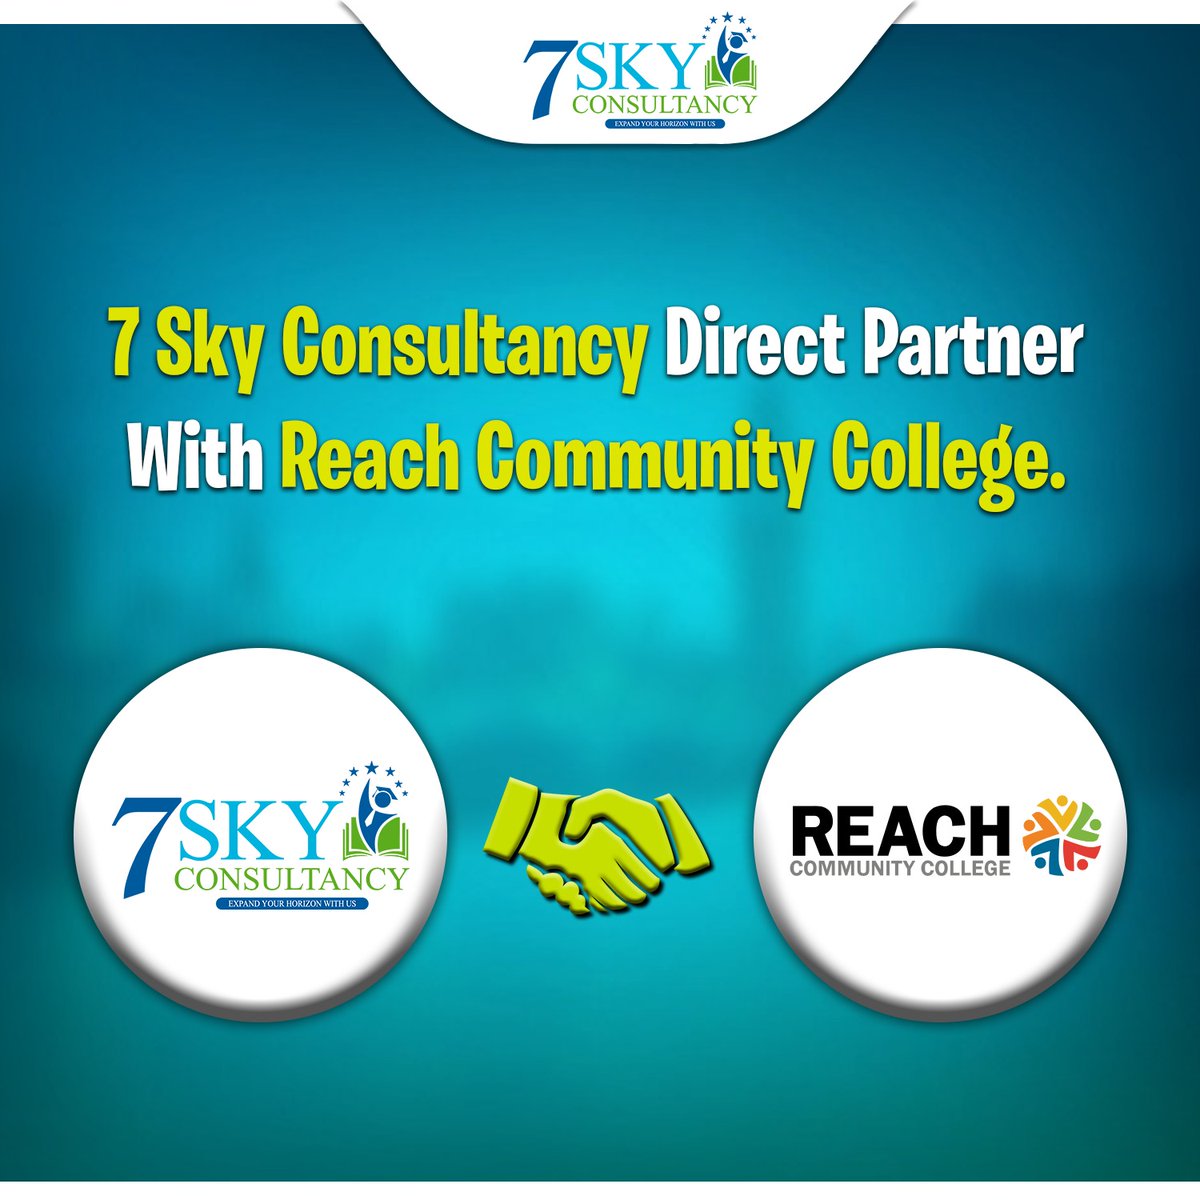 Thrilled to announce! 7 Sky Consultancy #partners with Reach Community College to empower students for career success! This collab offers: - Specialized Training - Expert Mentorship - Career Support Boost Stay tuned for exciting workshops & programs! #Partnership #Education